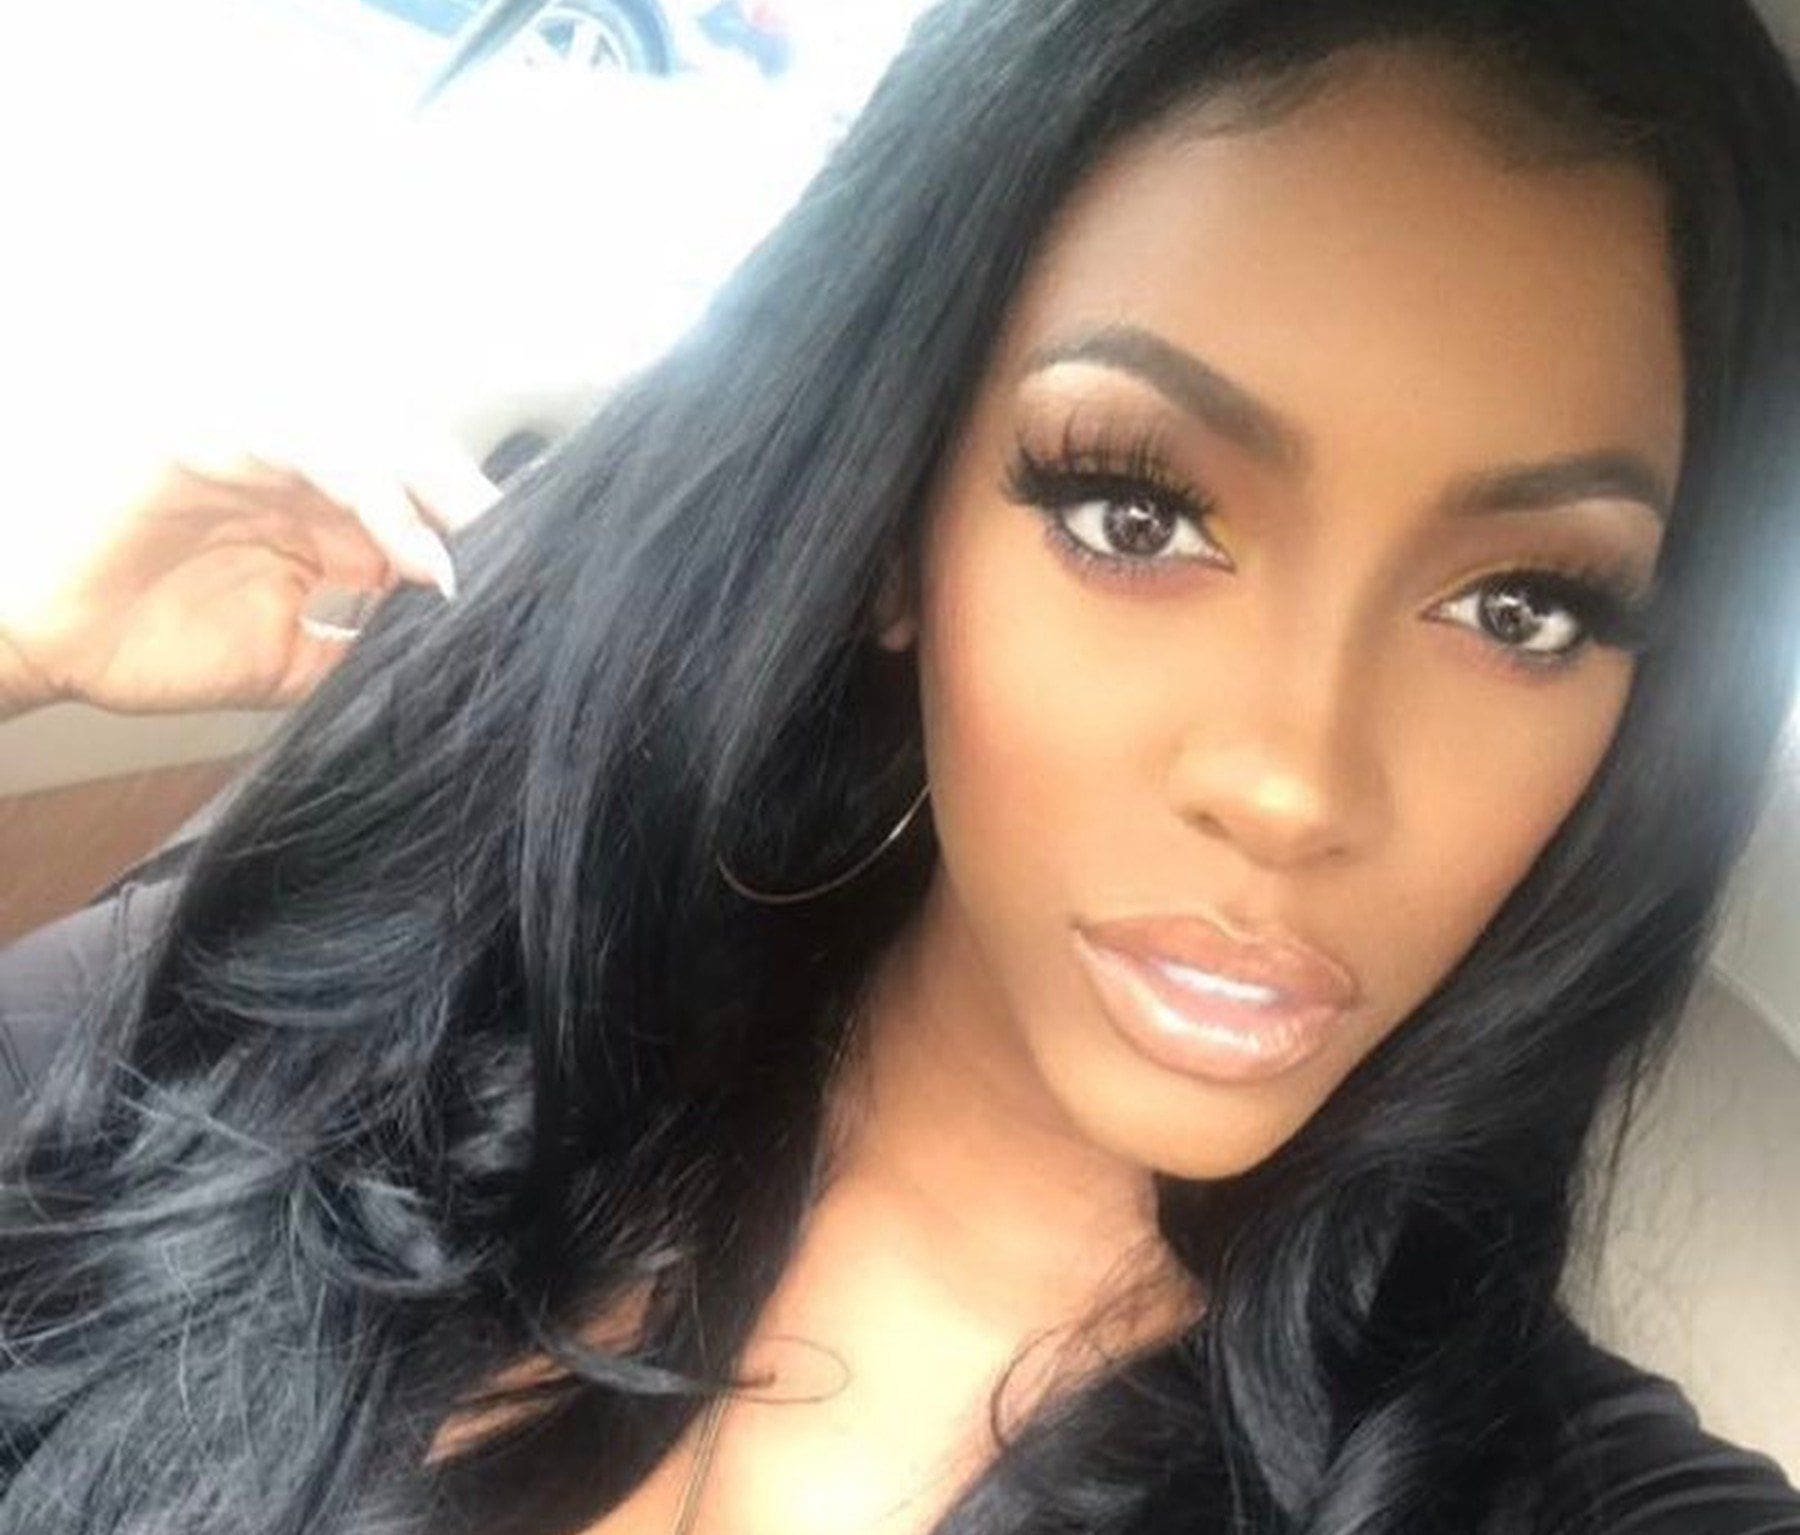 Porsha Williams Looks Gorgeous During Her Date Night With Dennis McKinley